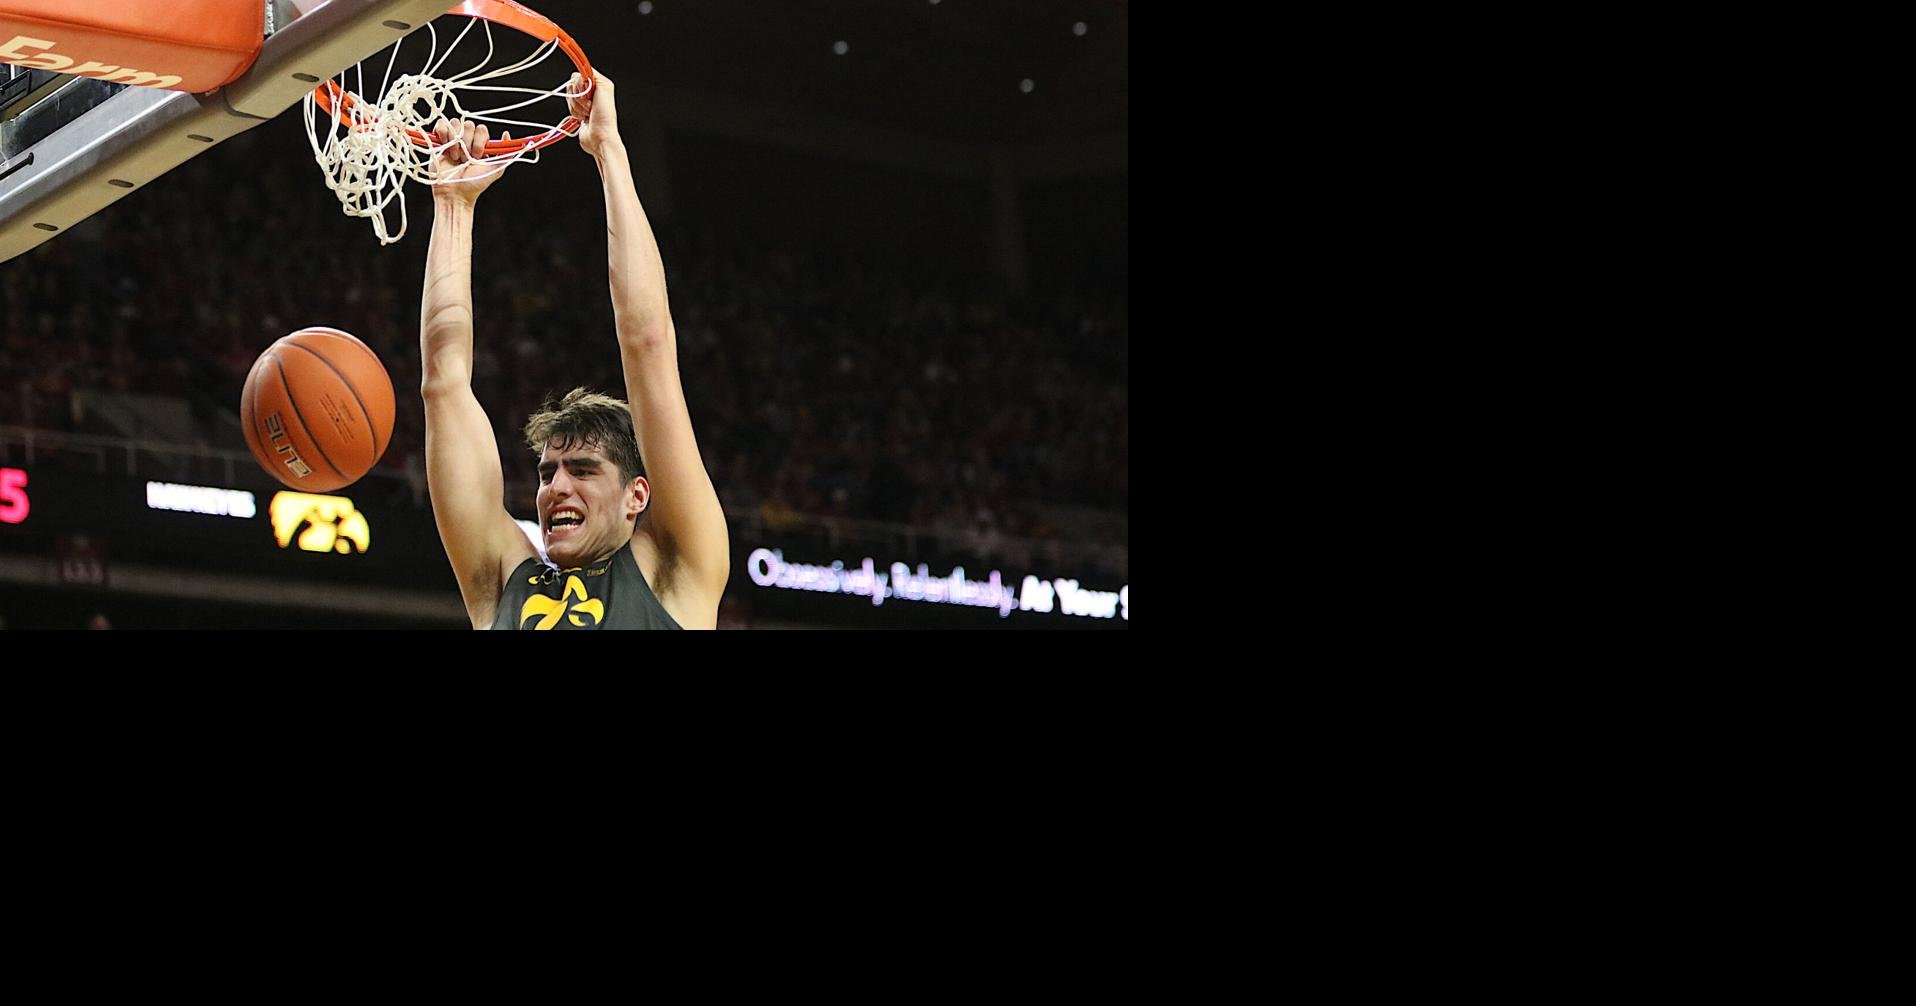 Iowa Basketball: Luka Garza lives up to hype in first game of season